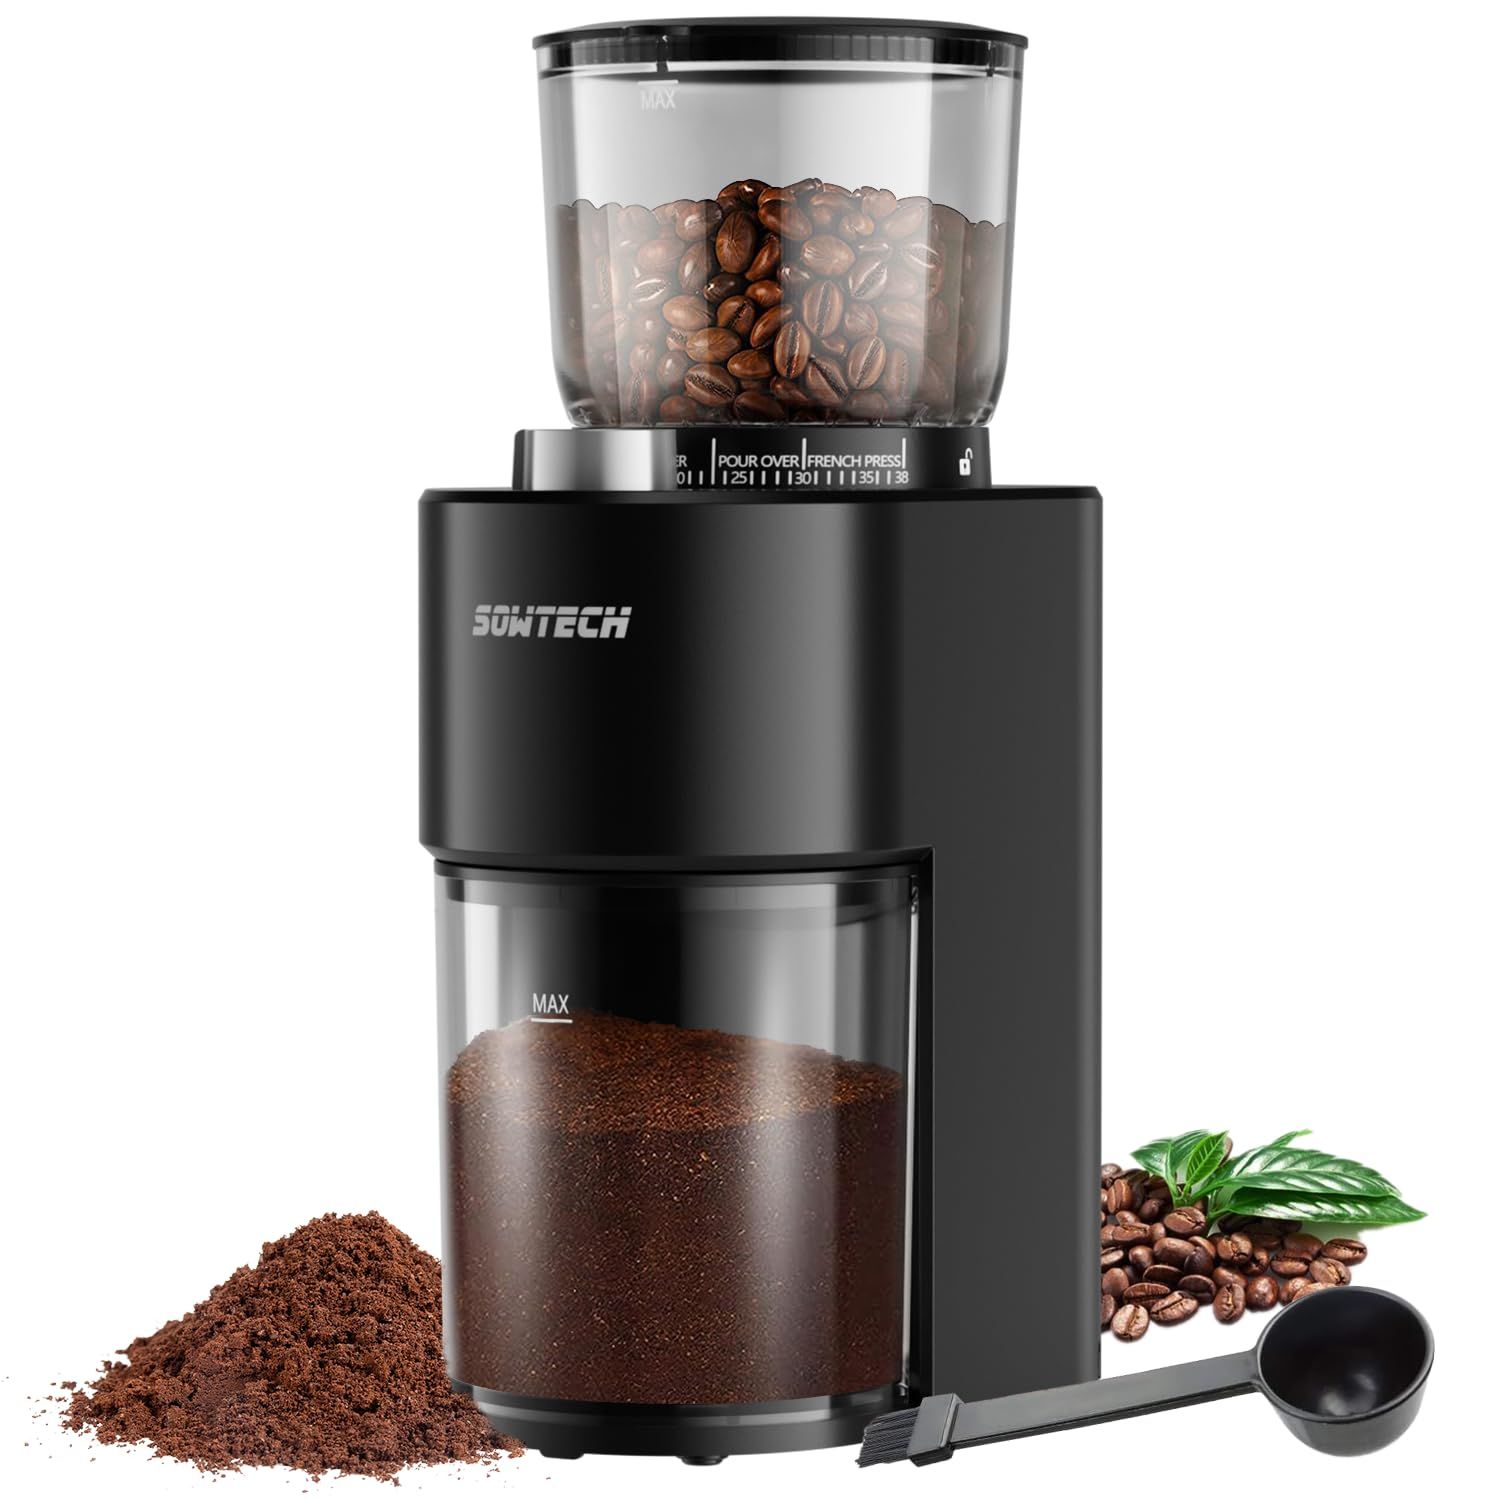 SOWTECH Anti-static Conical Burr Coffee Grinder, Adjustable Burr Mill with 38 Precise Grind Setting, precision timer, for Espresso/Drip/Pour Over/Cold Brew/French Press Coffee Maker(Black) | Amazon (US)